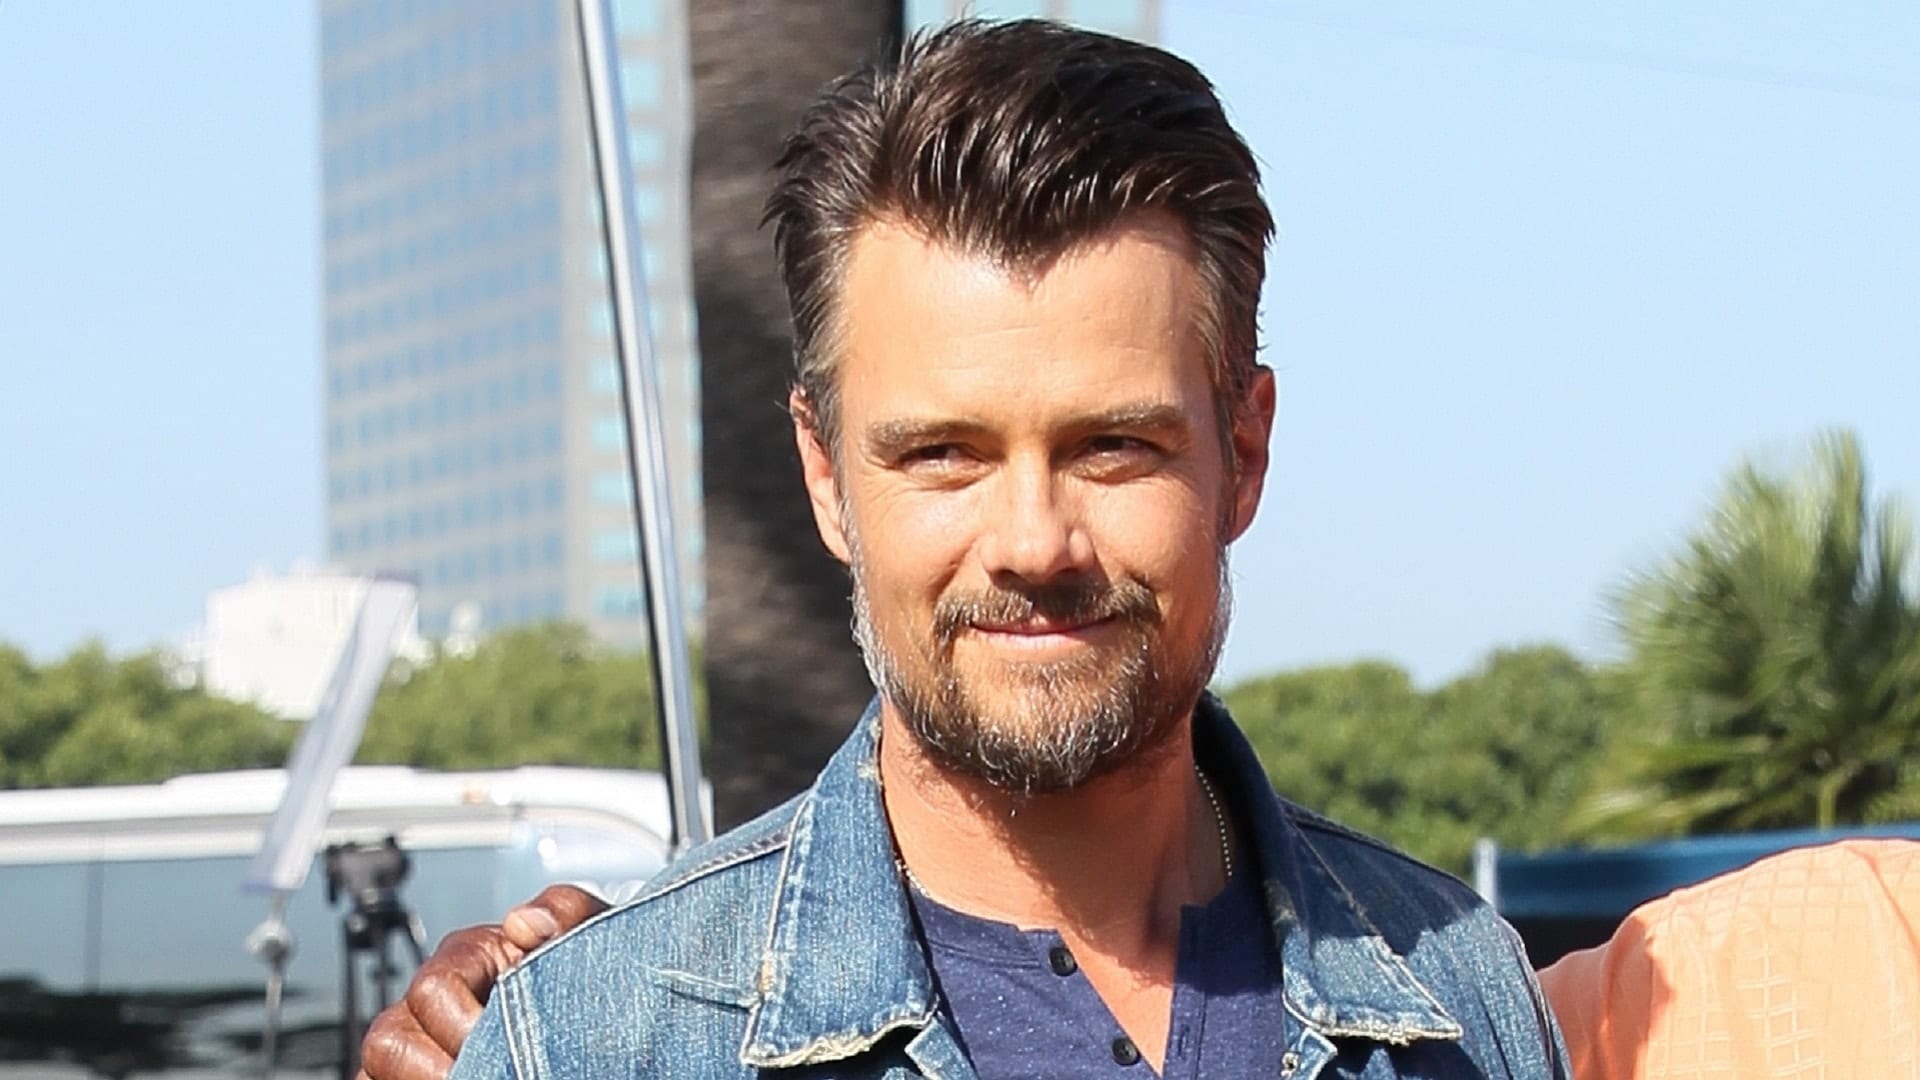 Who Is Josh Duhamel Dating? The Famous Transformers Star's Dating Life